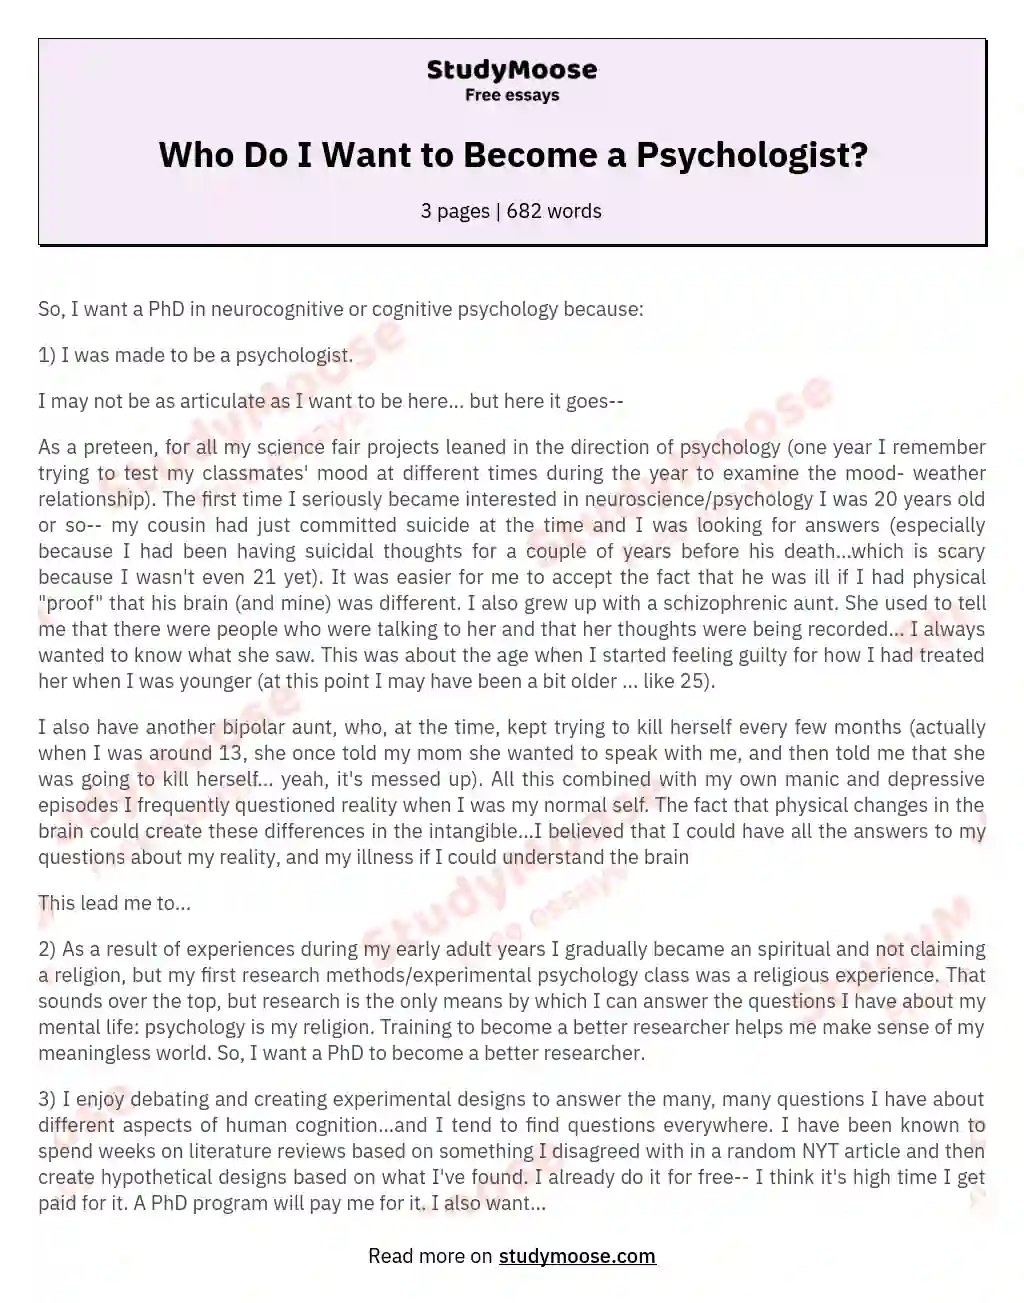 Who Do I Want to Become a Psychologist?